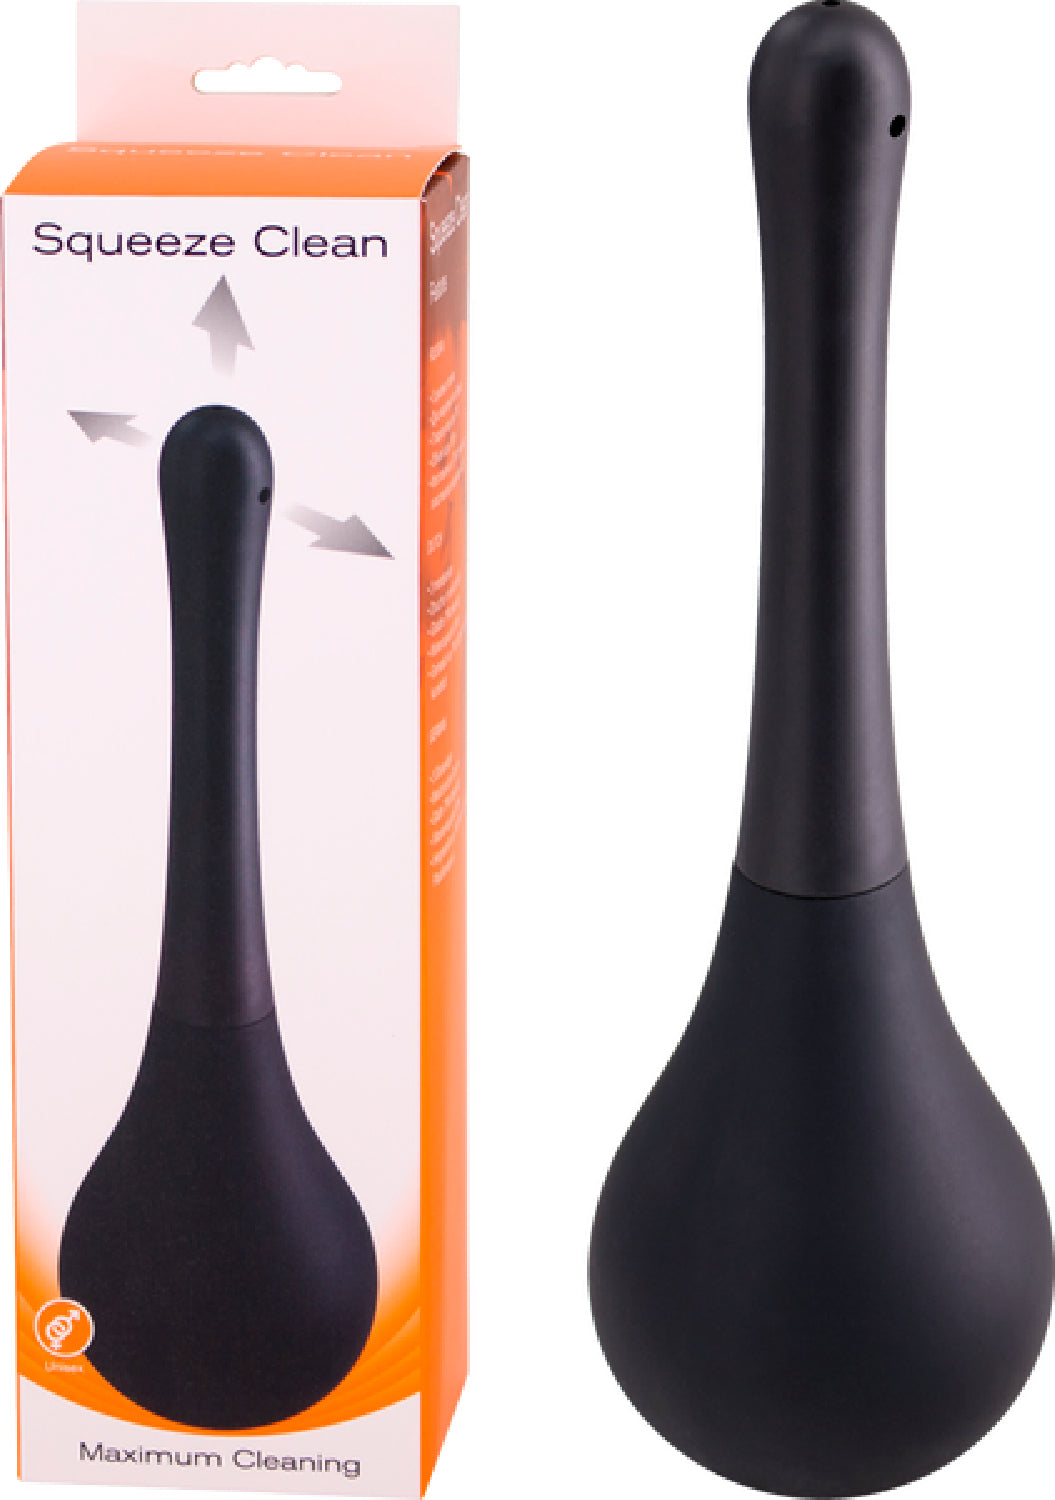 Squeeze Clean - One Stop Adult Shop